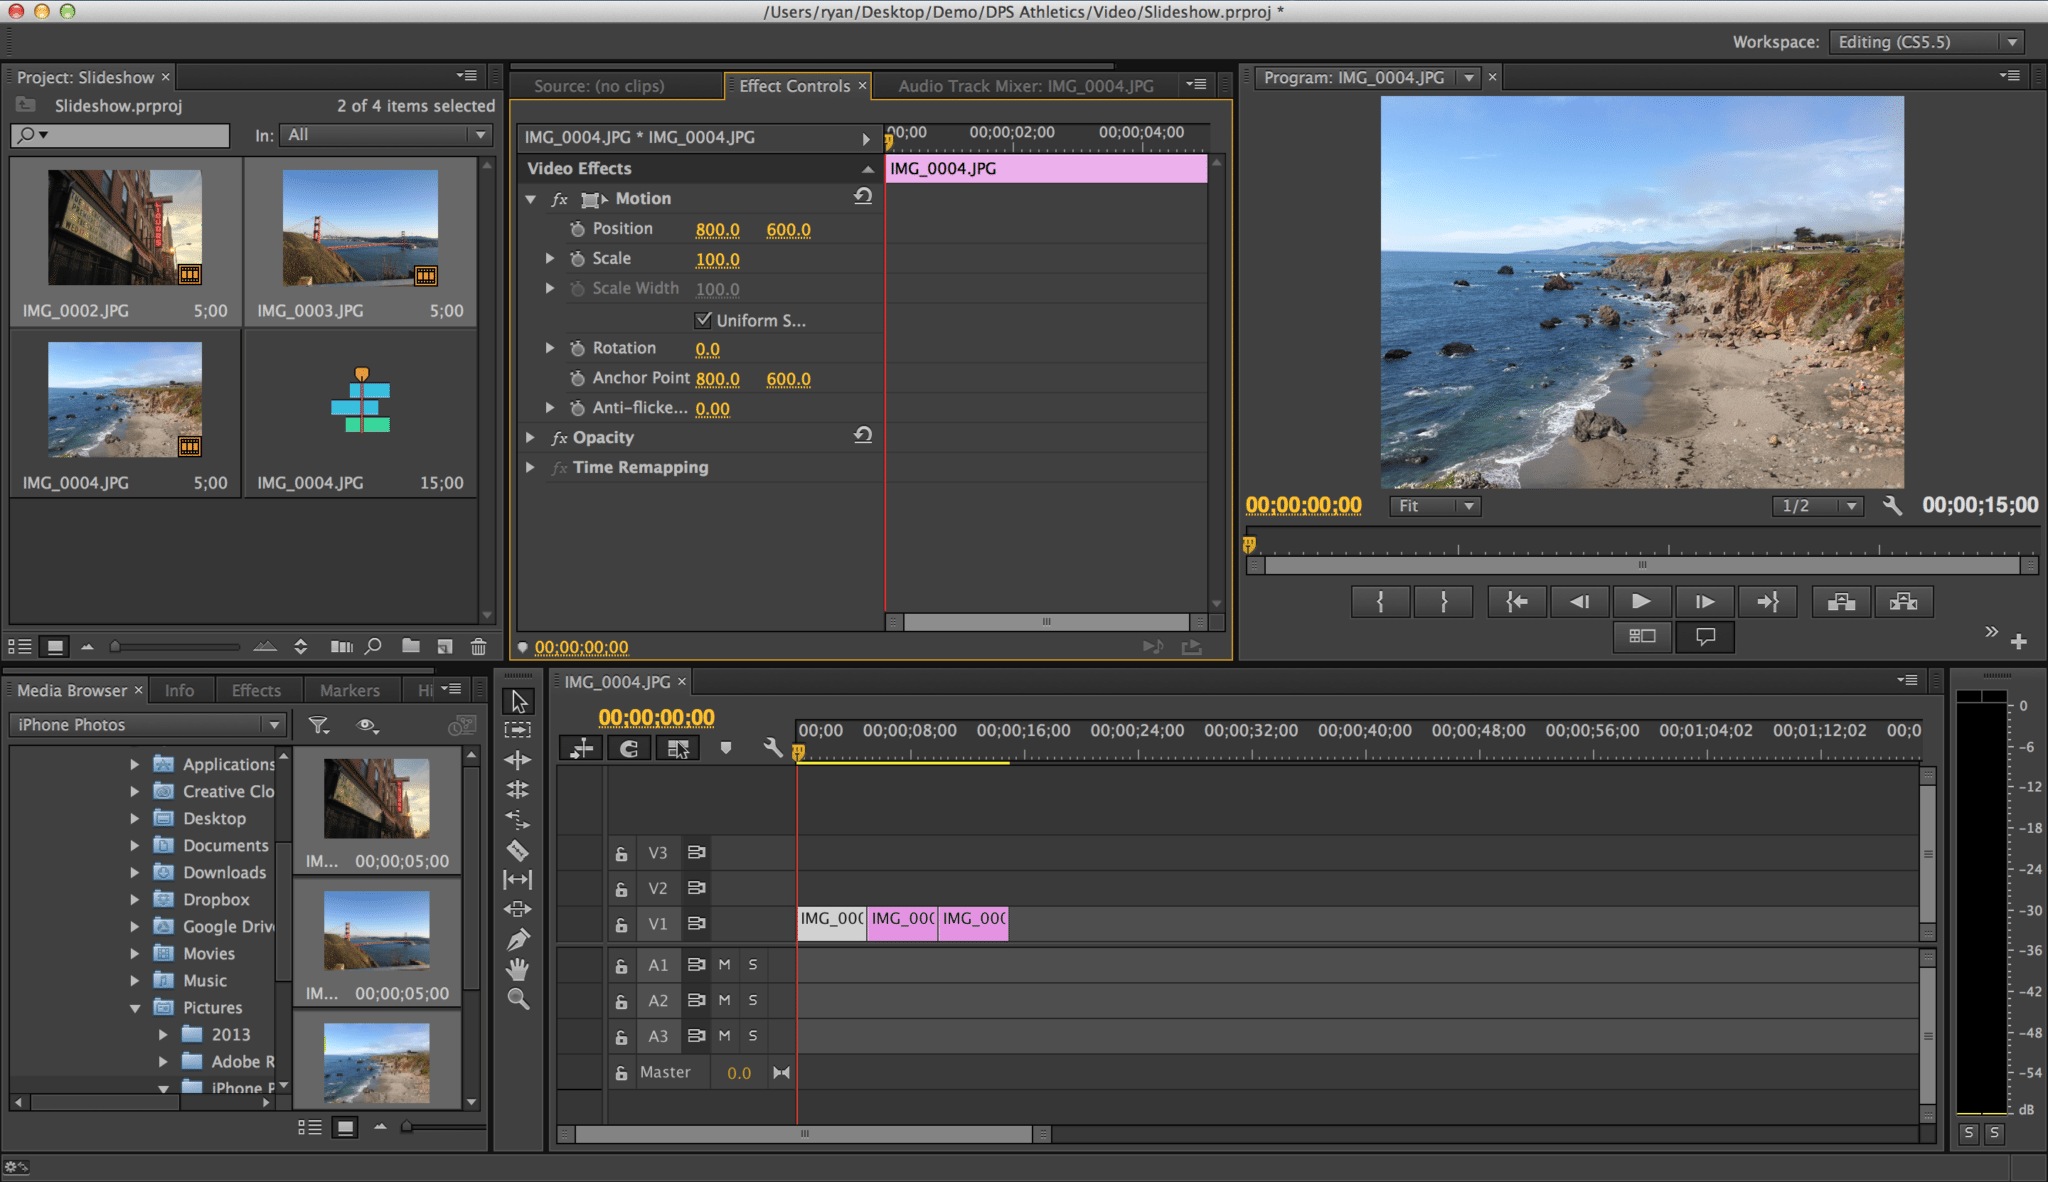 You can use Adobe Premiere to edit your vlogs